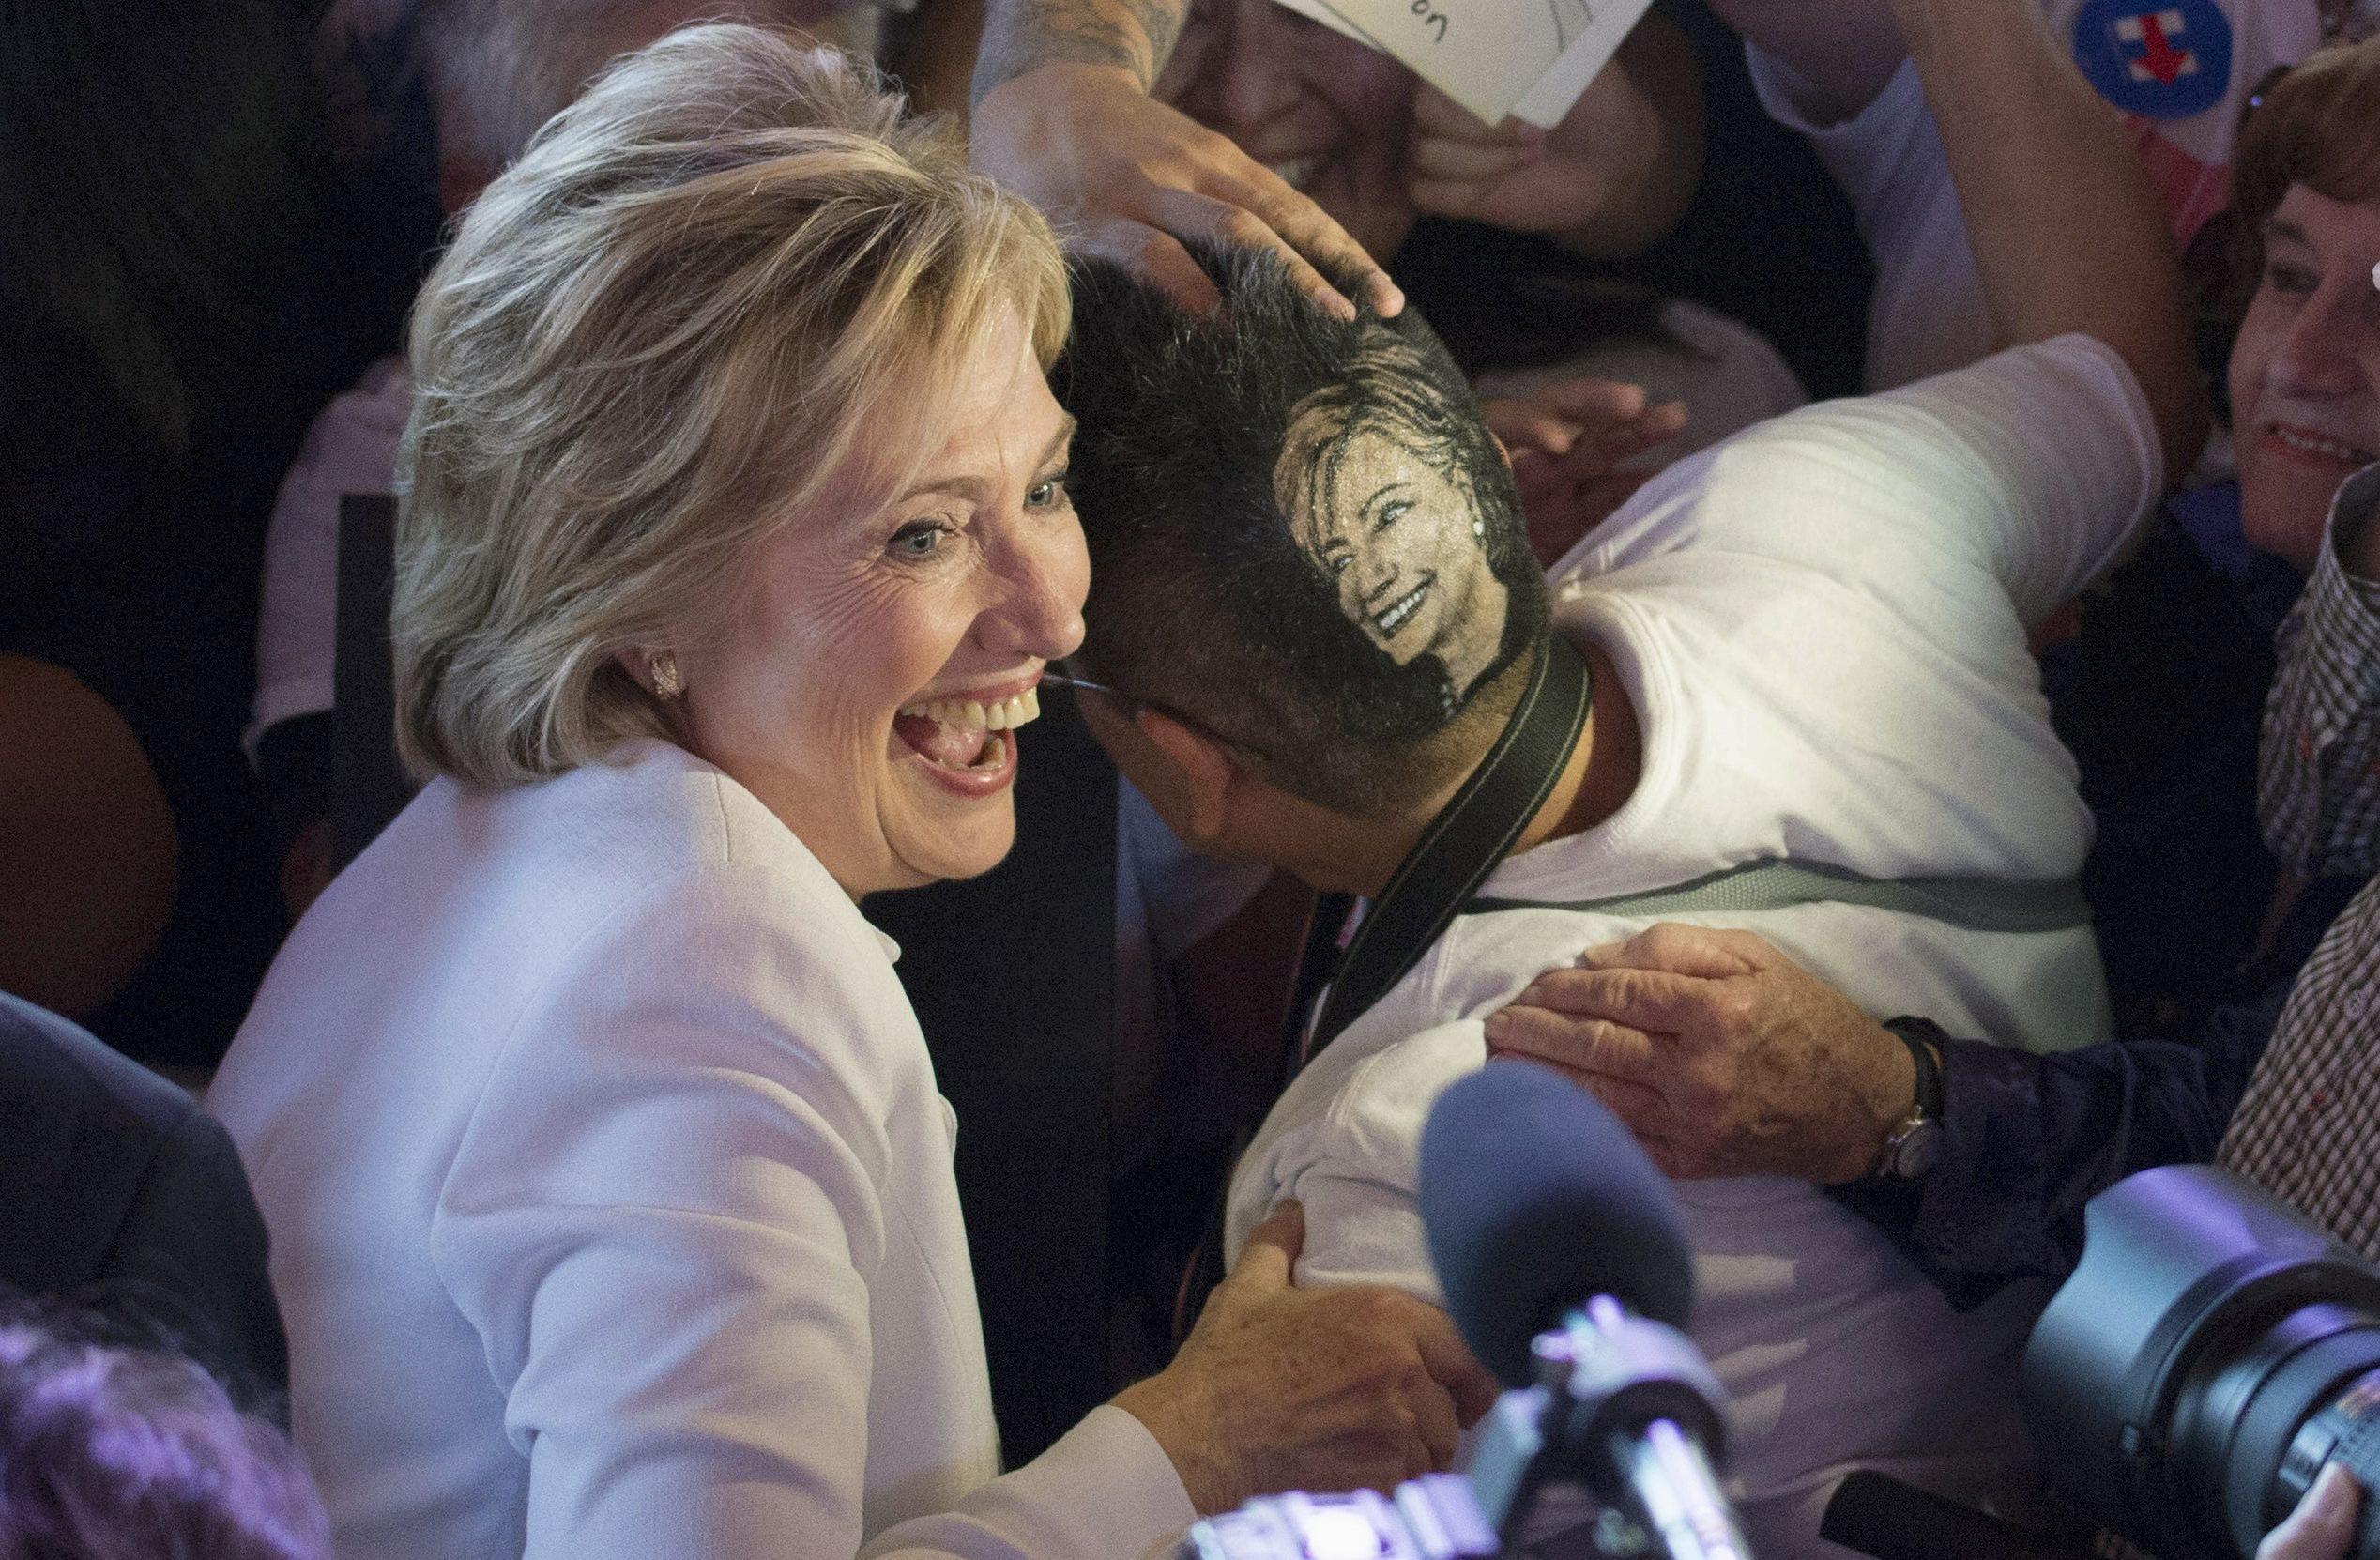 Democratic presidential candidate Clinton poses for a picture with supporter Monsivaiz who has her h